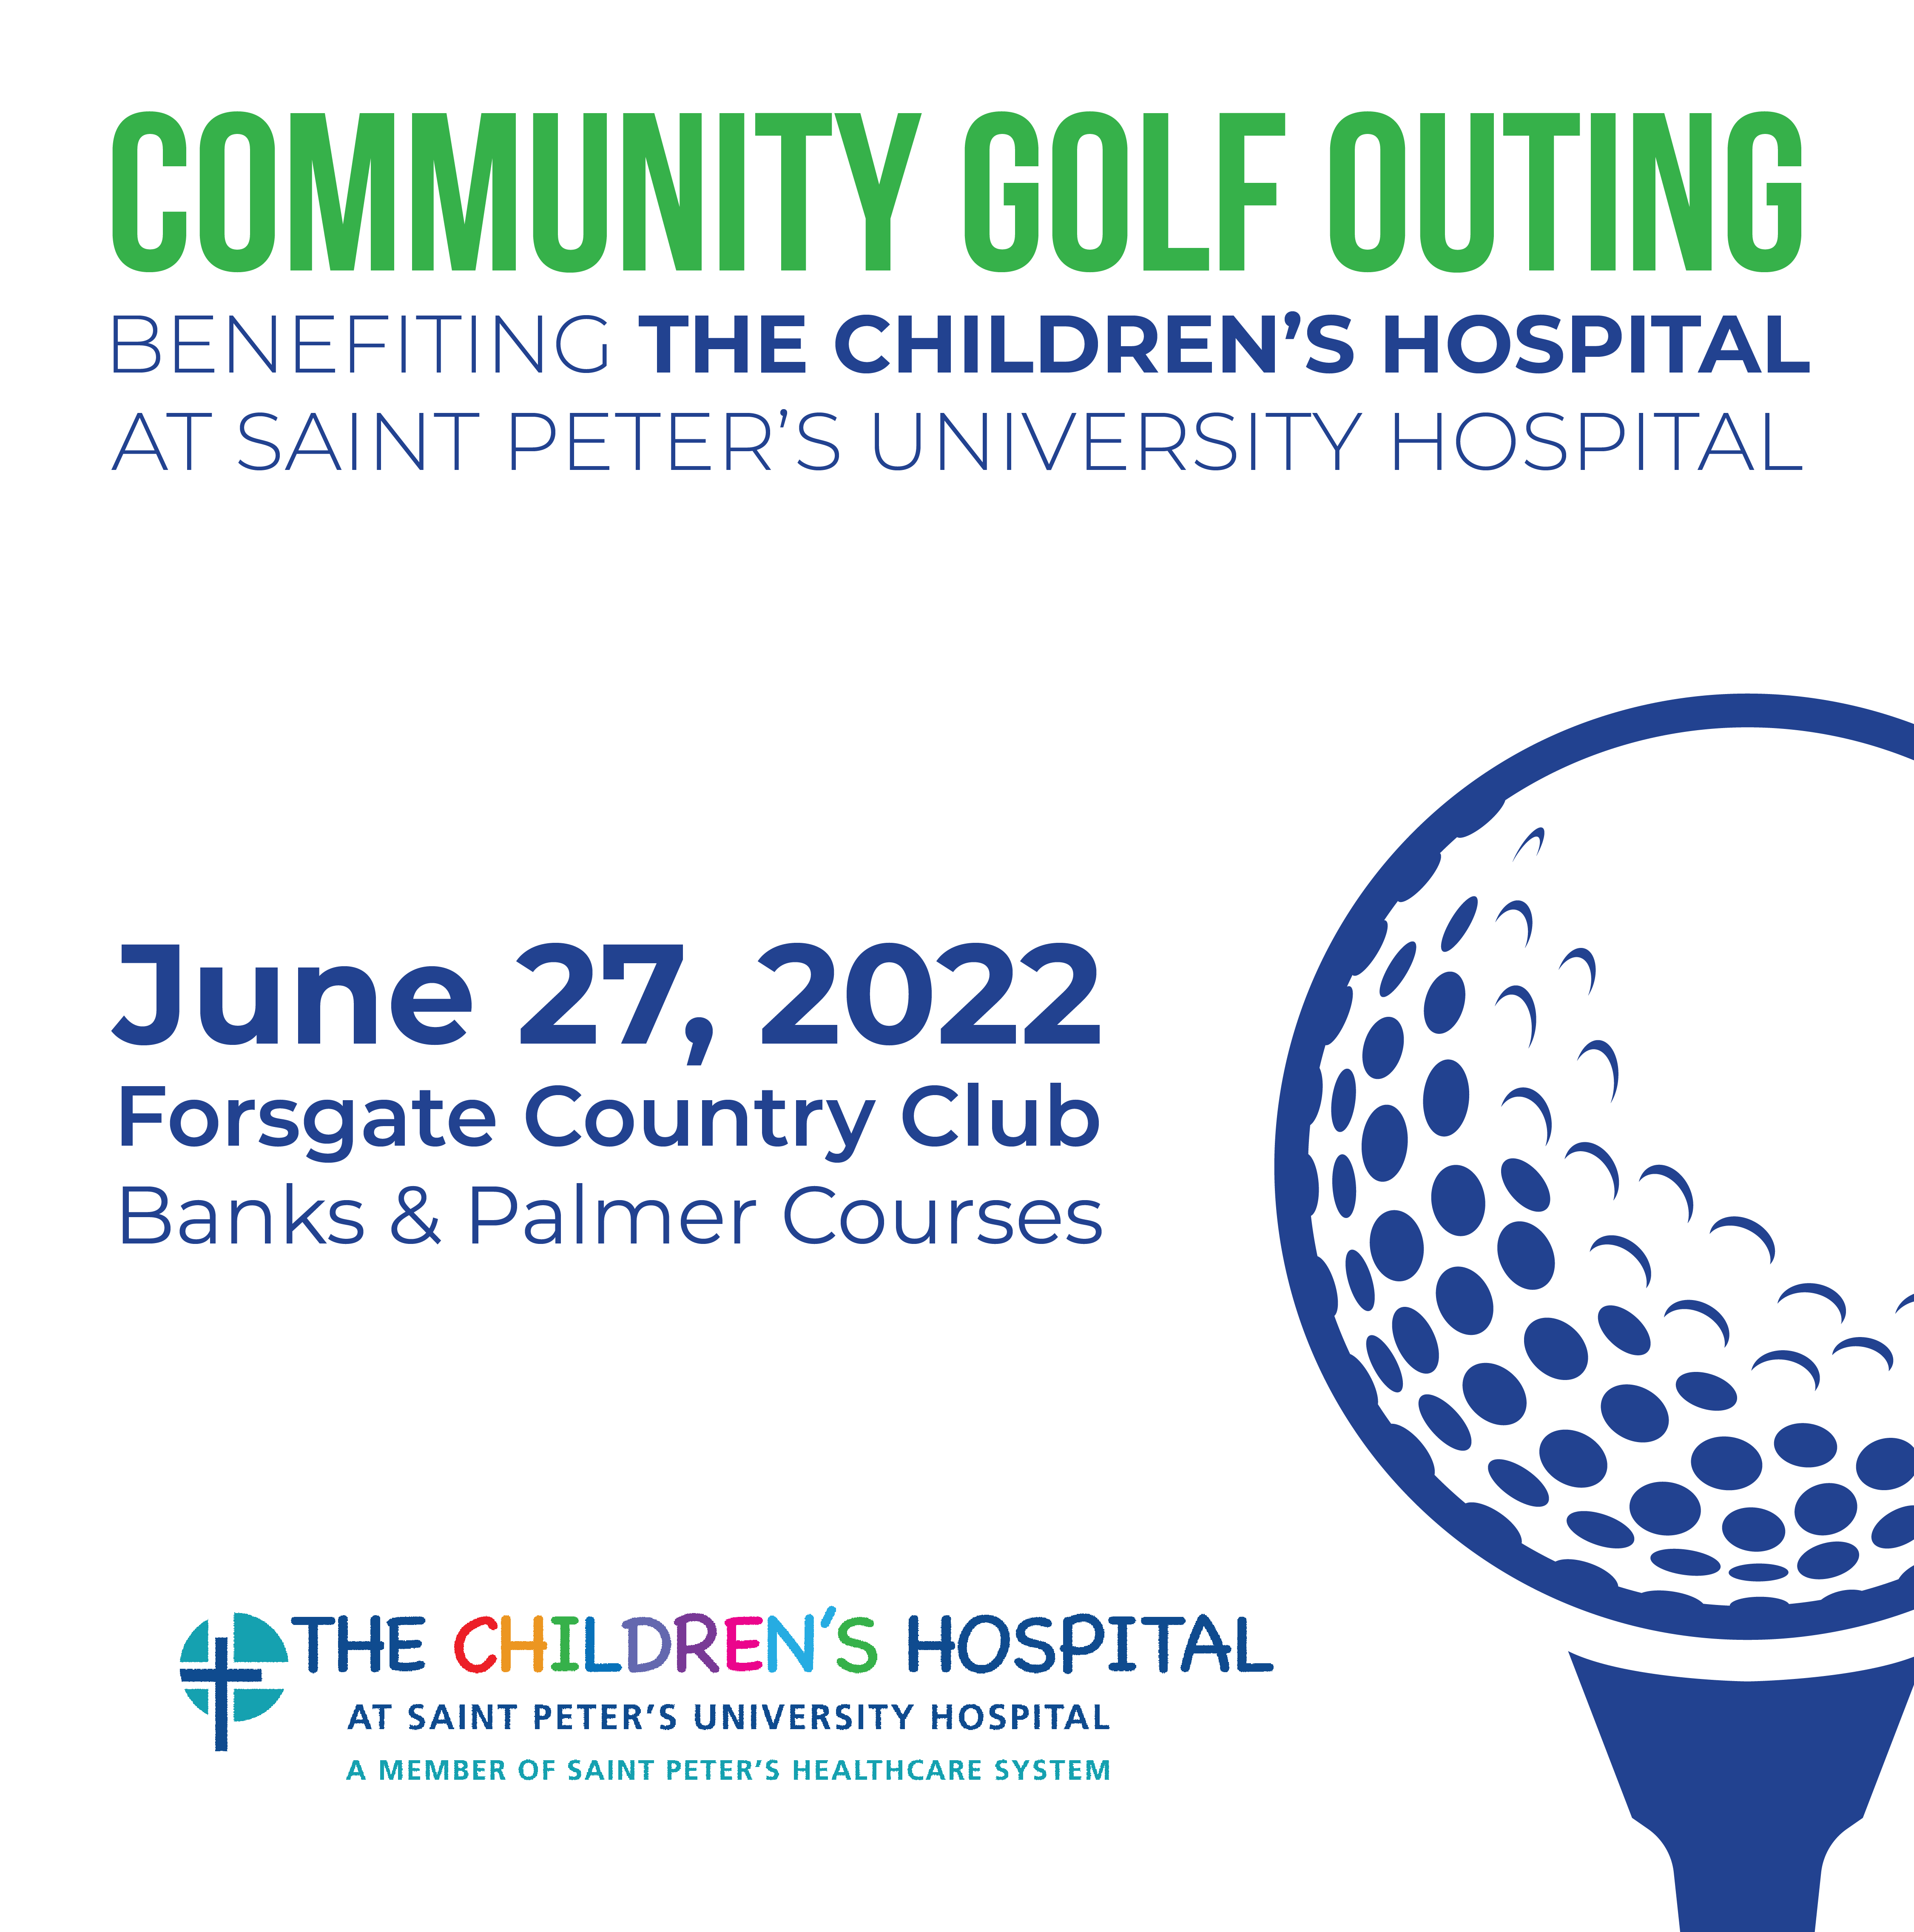 Community Golf Outing on June 27, 2022